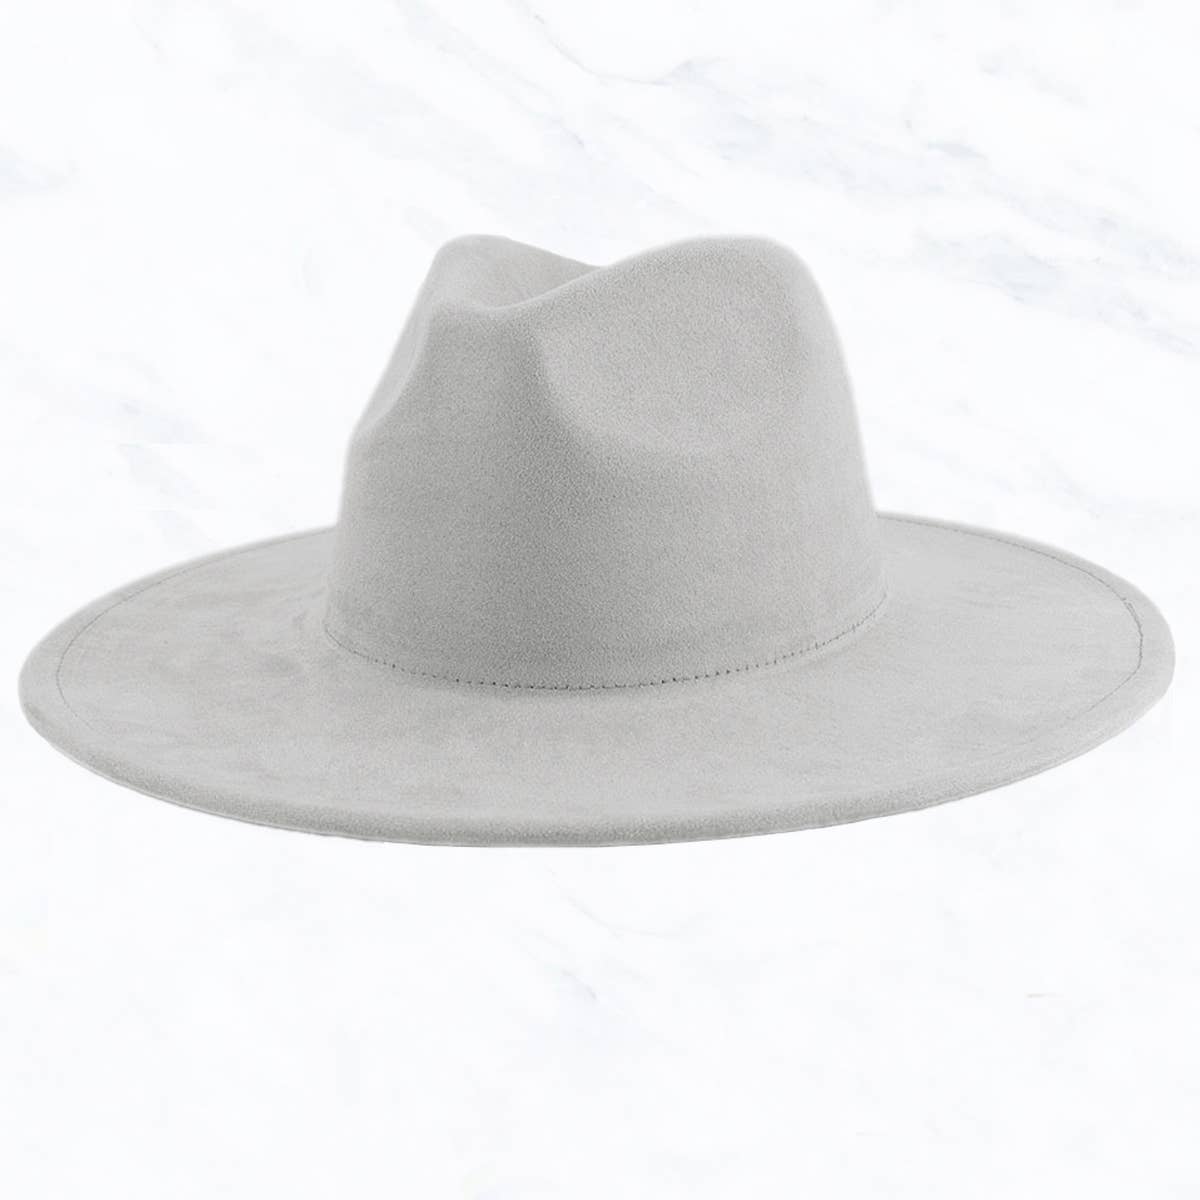 Suzie Q USA - Suede Large Eaves Peach Top Fedora Hat: Camel